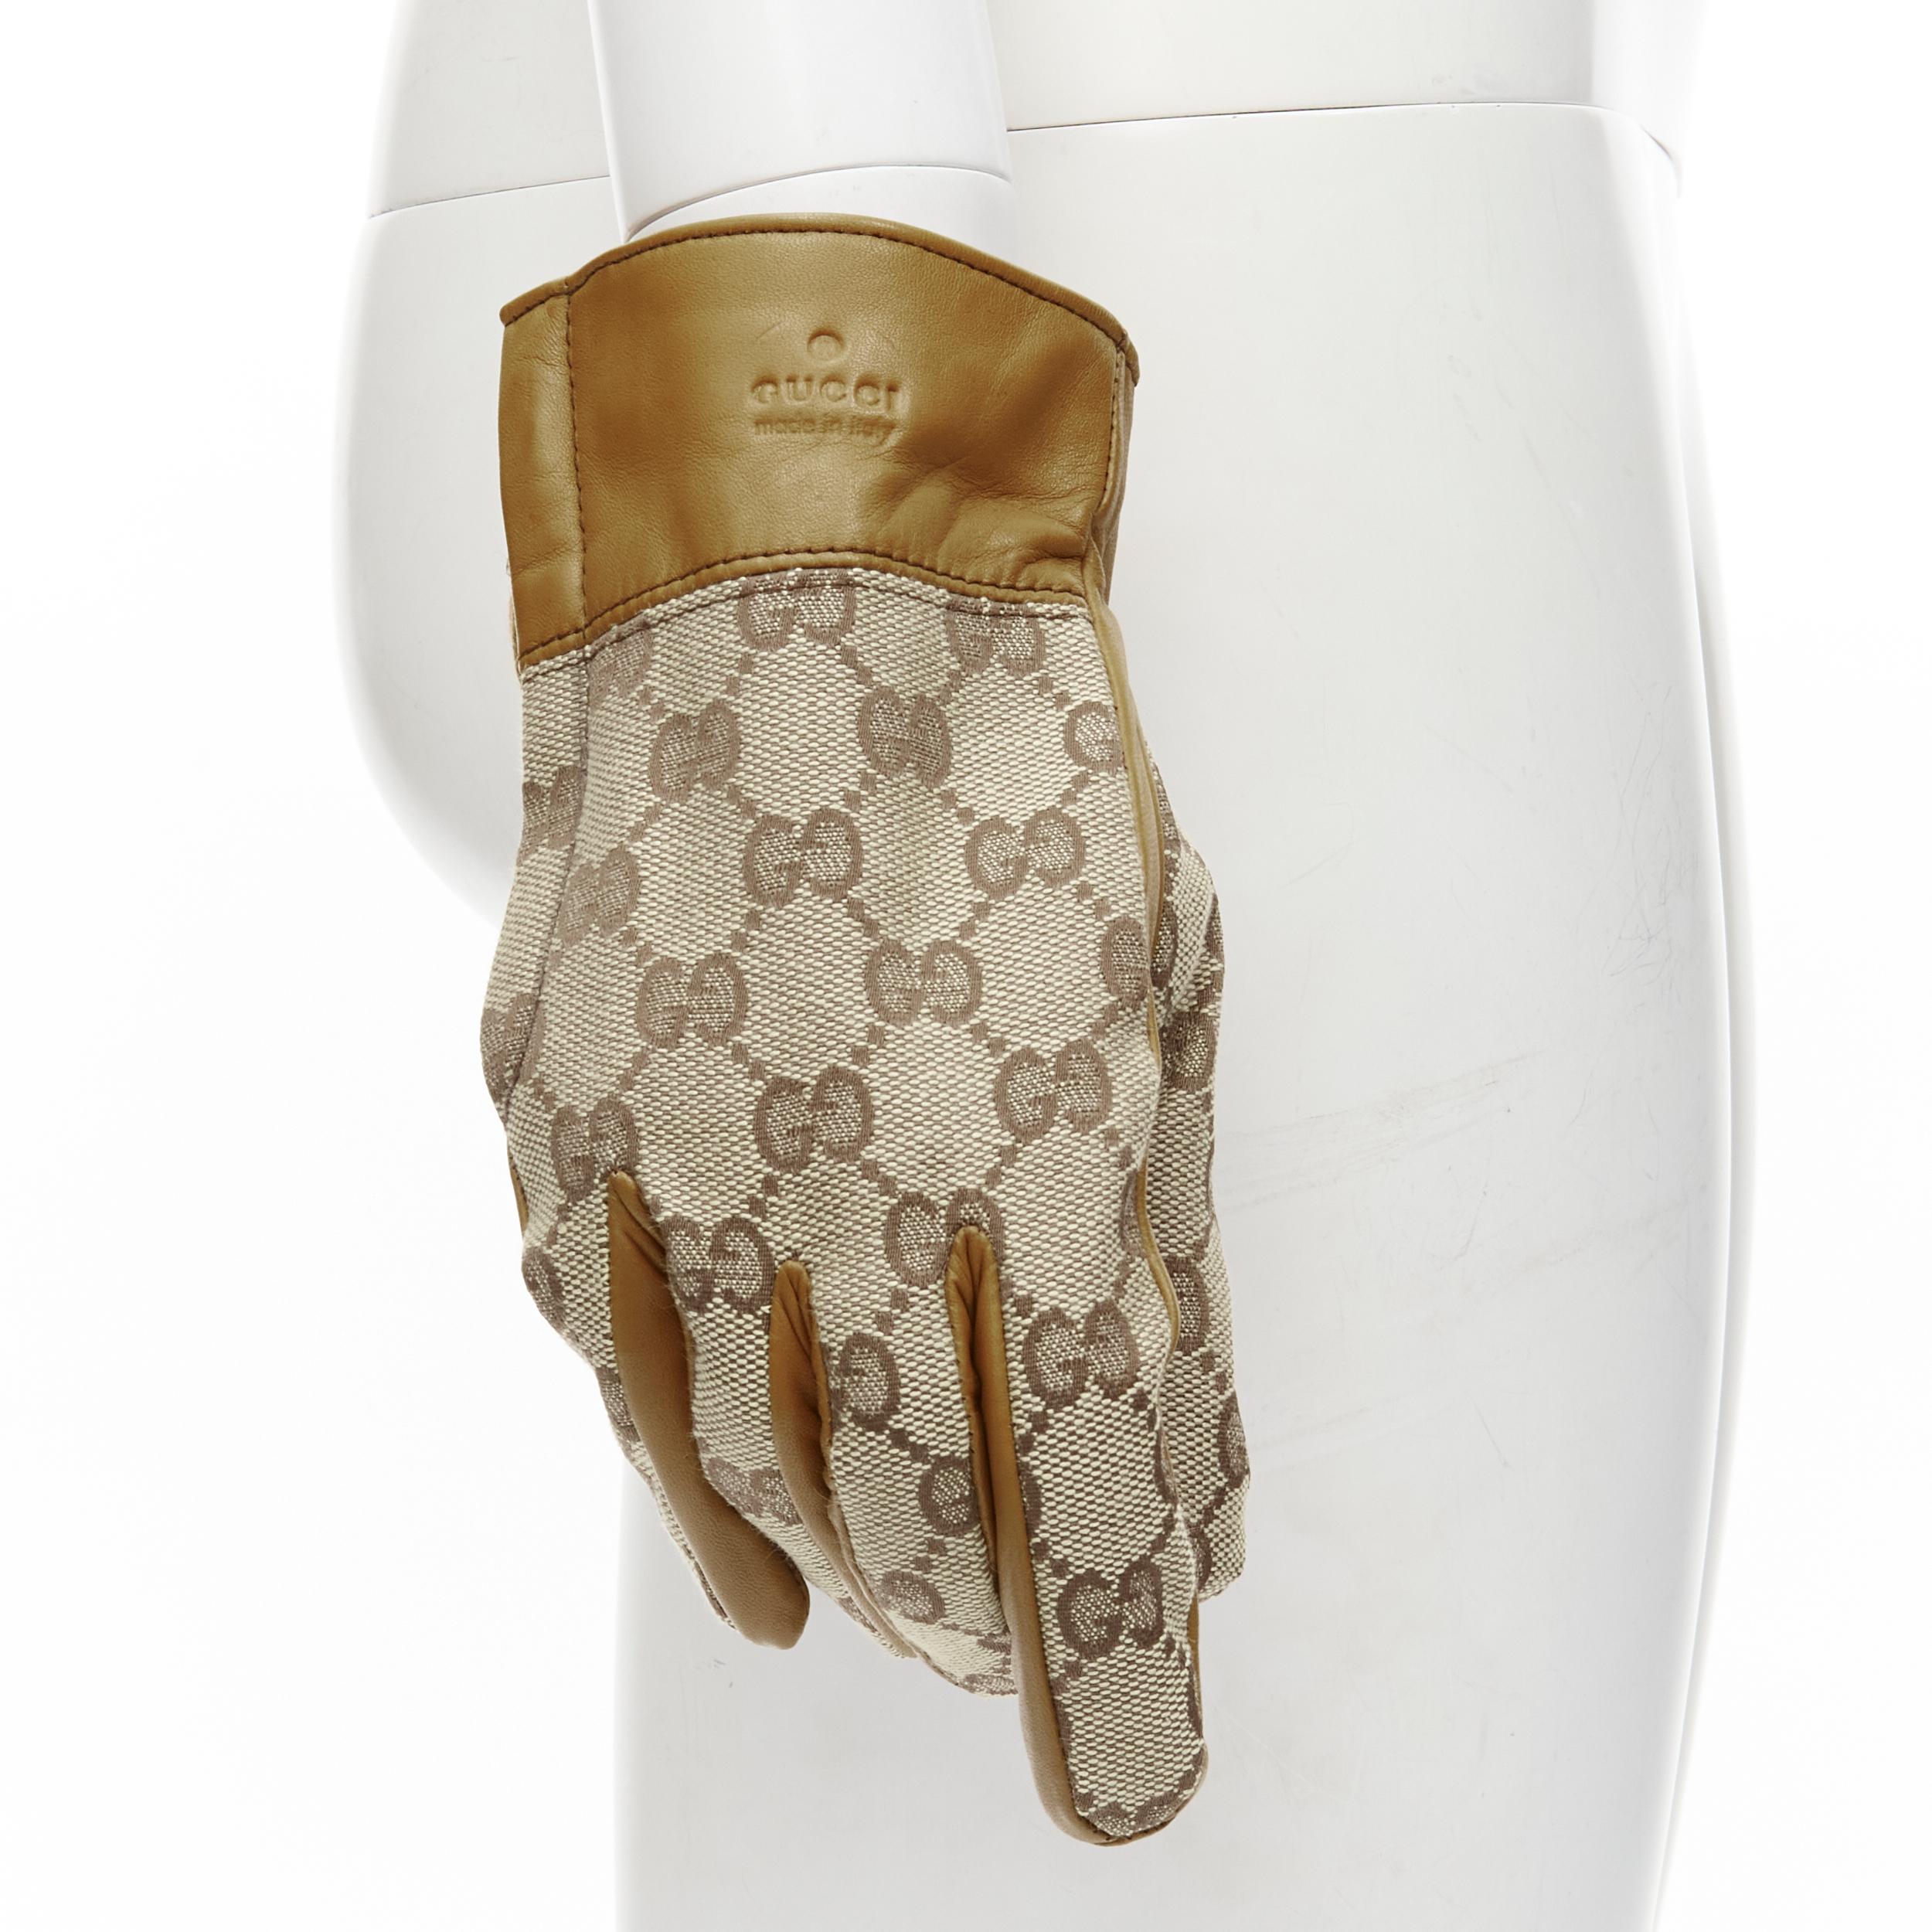 GUCCI GG monogram canvas brown leather trim cashmere lined glove Size 7
Brand: Gucci
Material: Calfskin Leather
Color: Brown
Pattern: Logomania
Closure: Half Zip
Extra Detail: Gucci emboss. Web trim zipper pull.
Made in: Italy

CONDITION:
Condition: